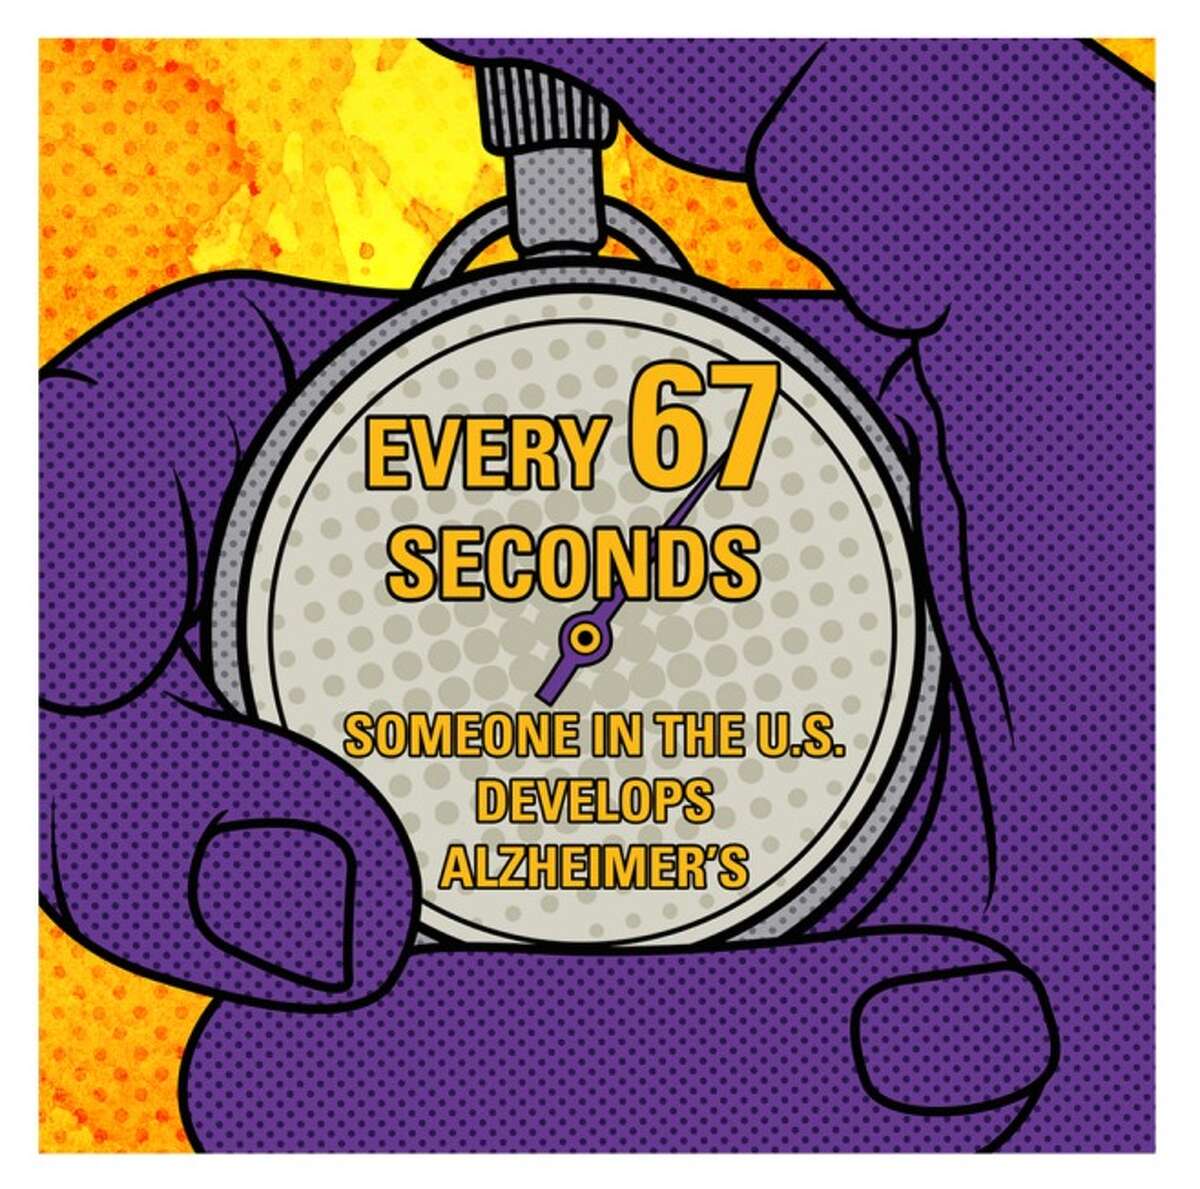 The Alzheimer's Association shows the facts about the disease. Keep clicking to learn more about this fatal illness.